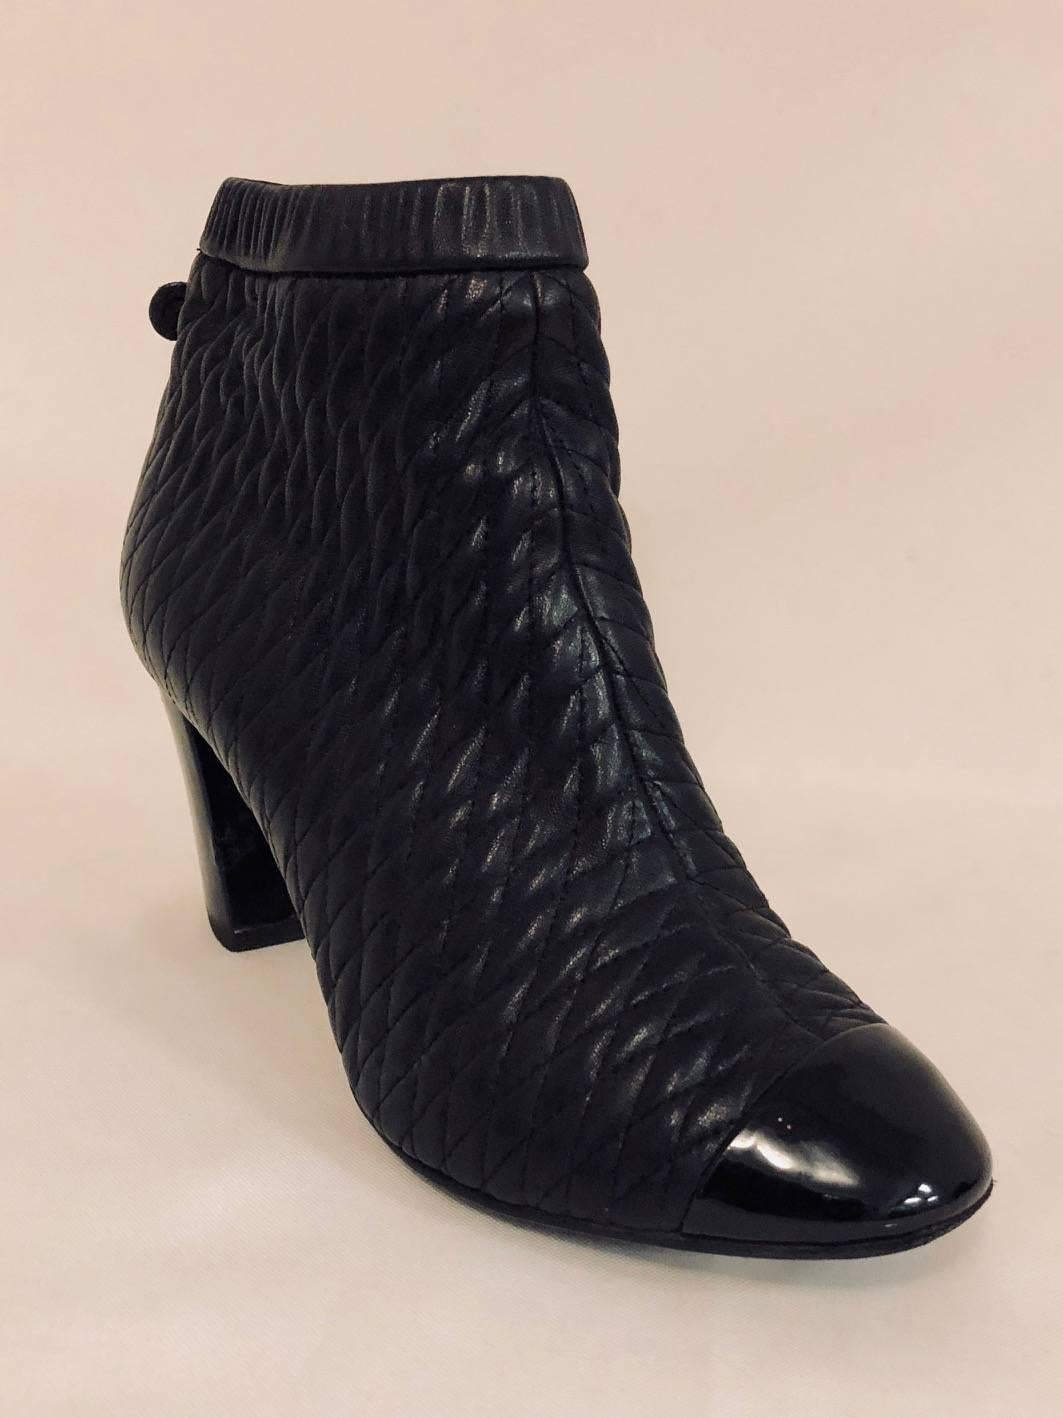 Chanel black quilted leather ankle booties with round patent leather cap toe and heels featuring white interlocking CC logo at top of heel.  For easy access these booties possess a side zipper closure.   In good condition showing some wear on the